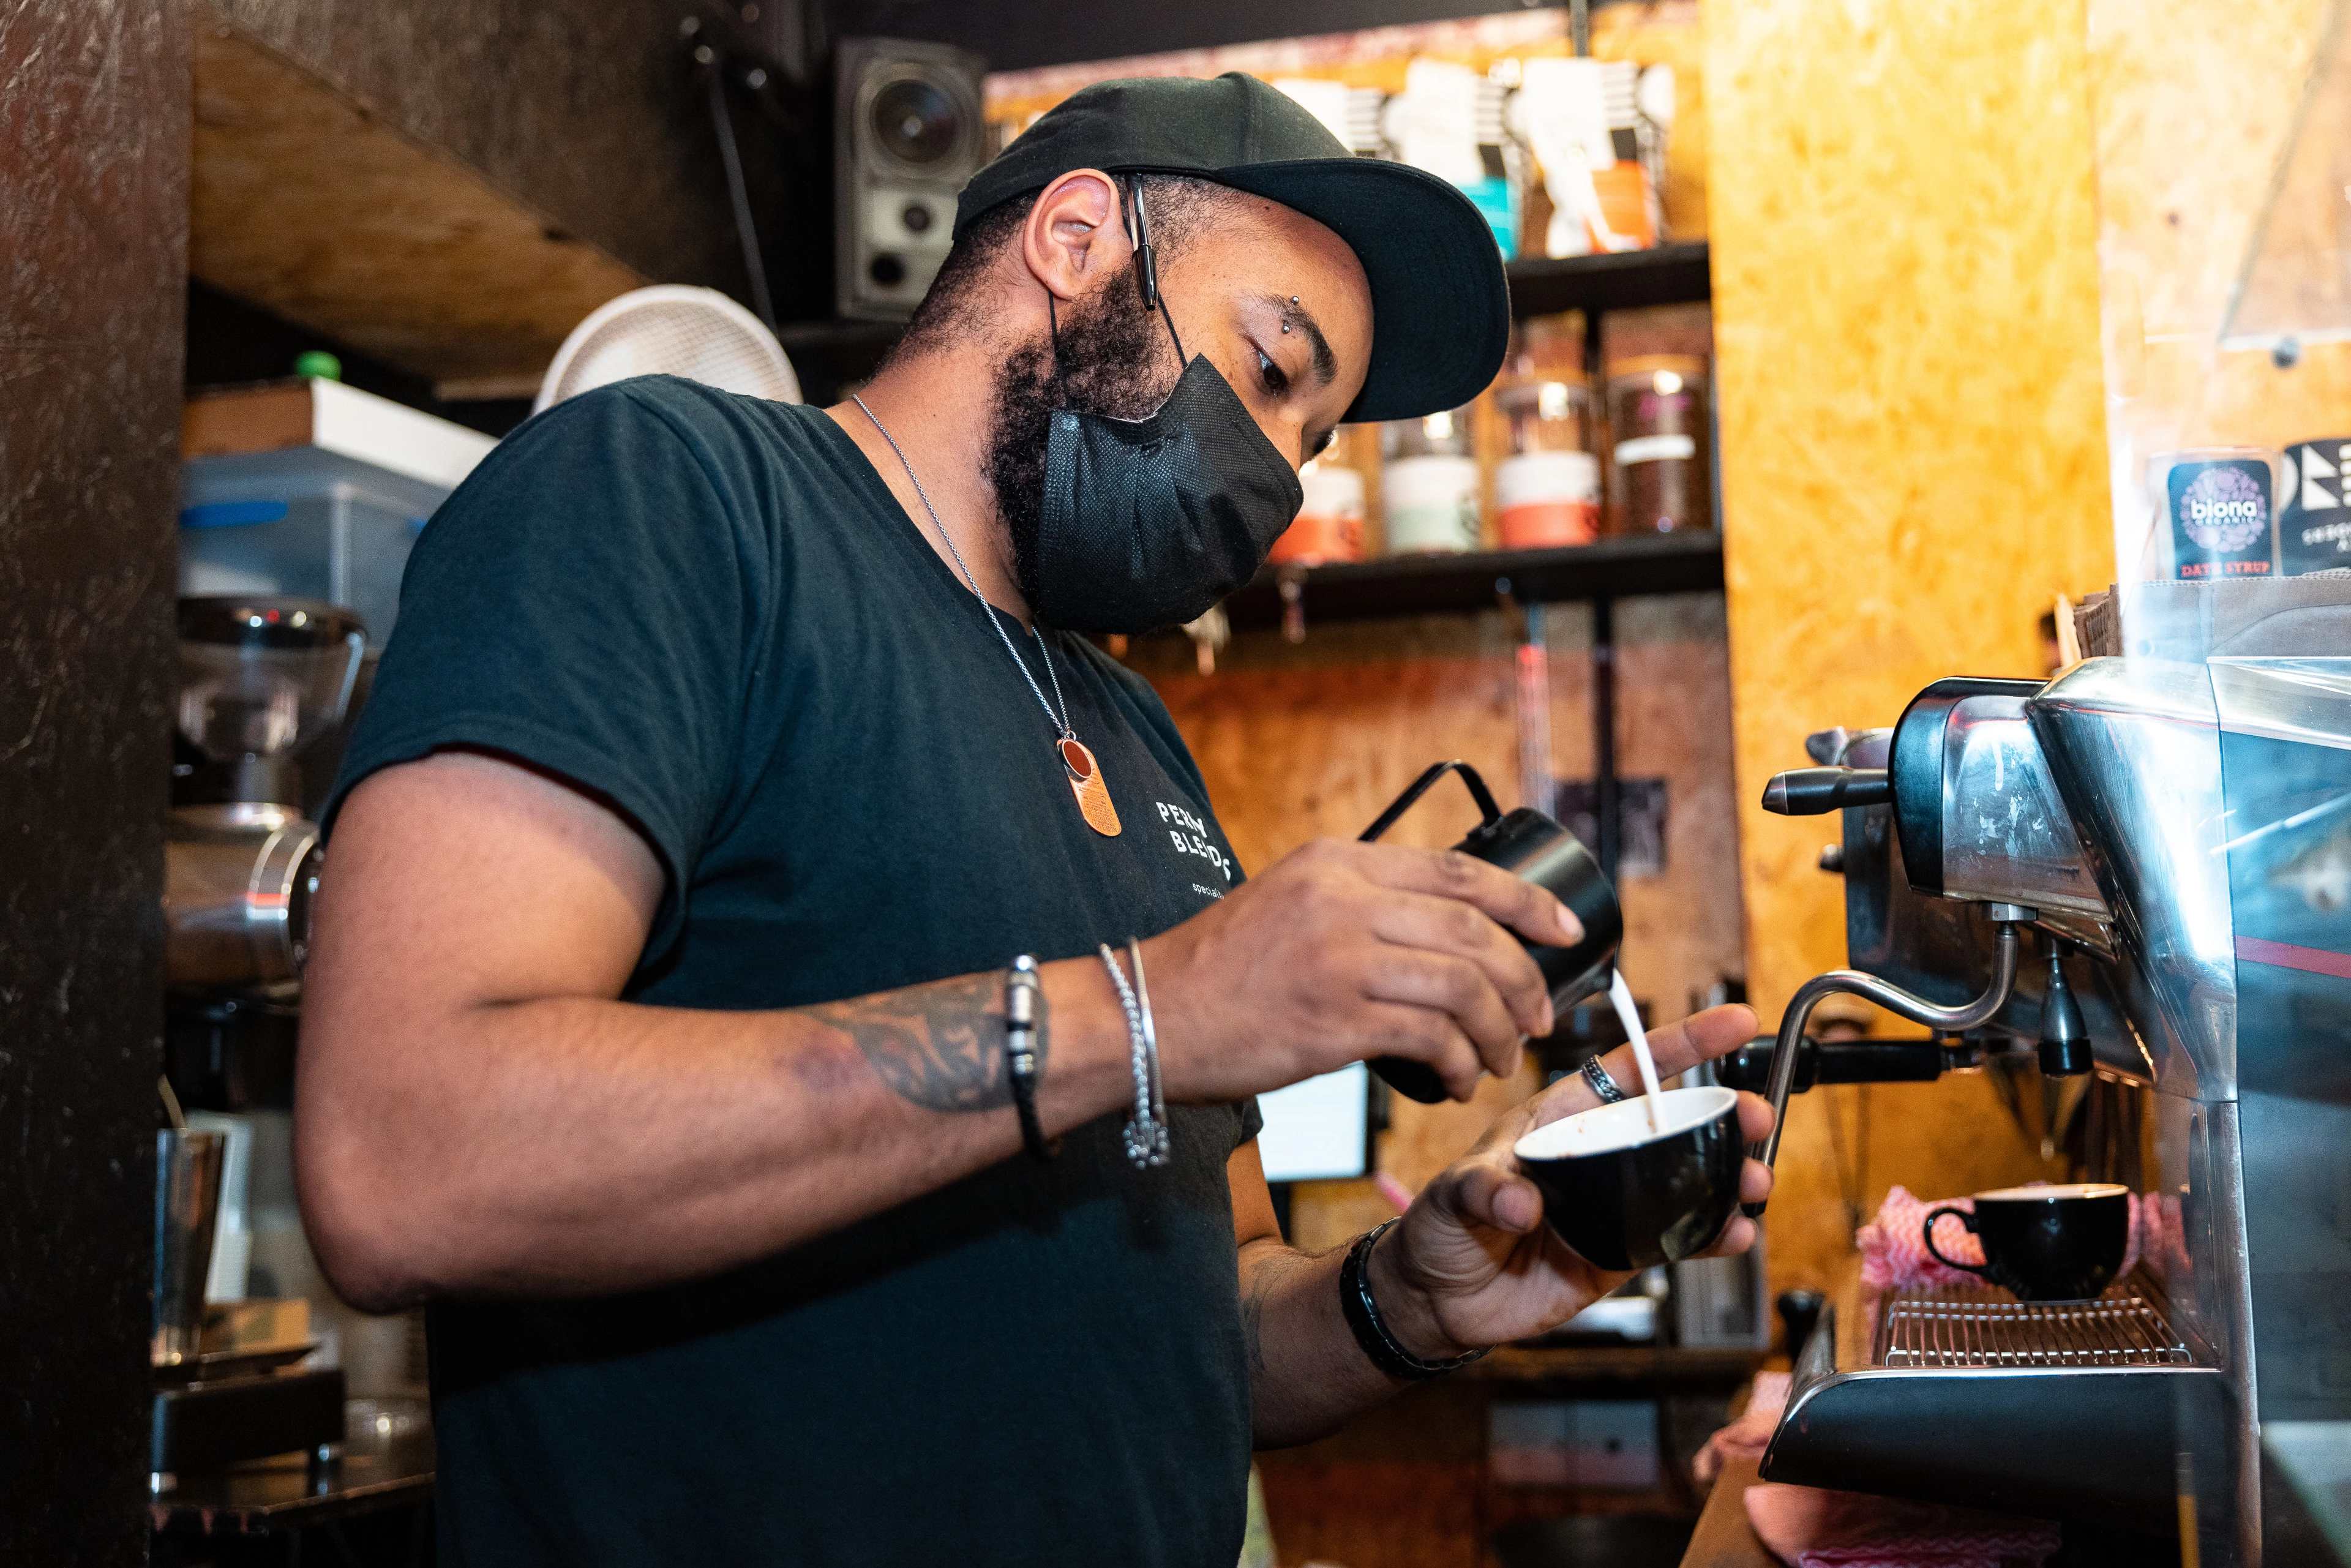 Coffee roasted by Perky Blenders in East London will be served up on The Tour​